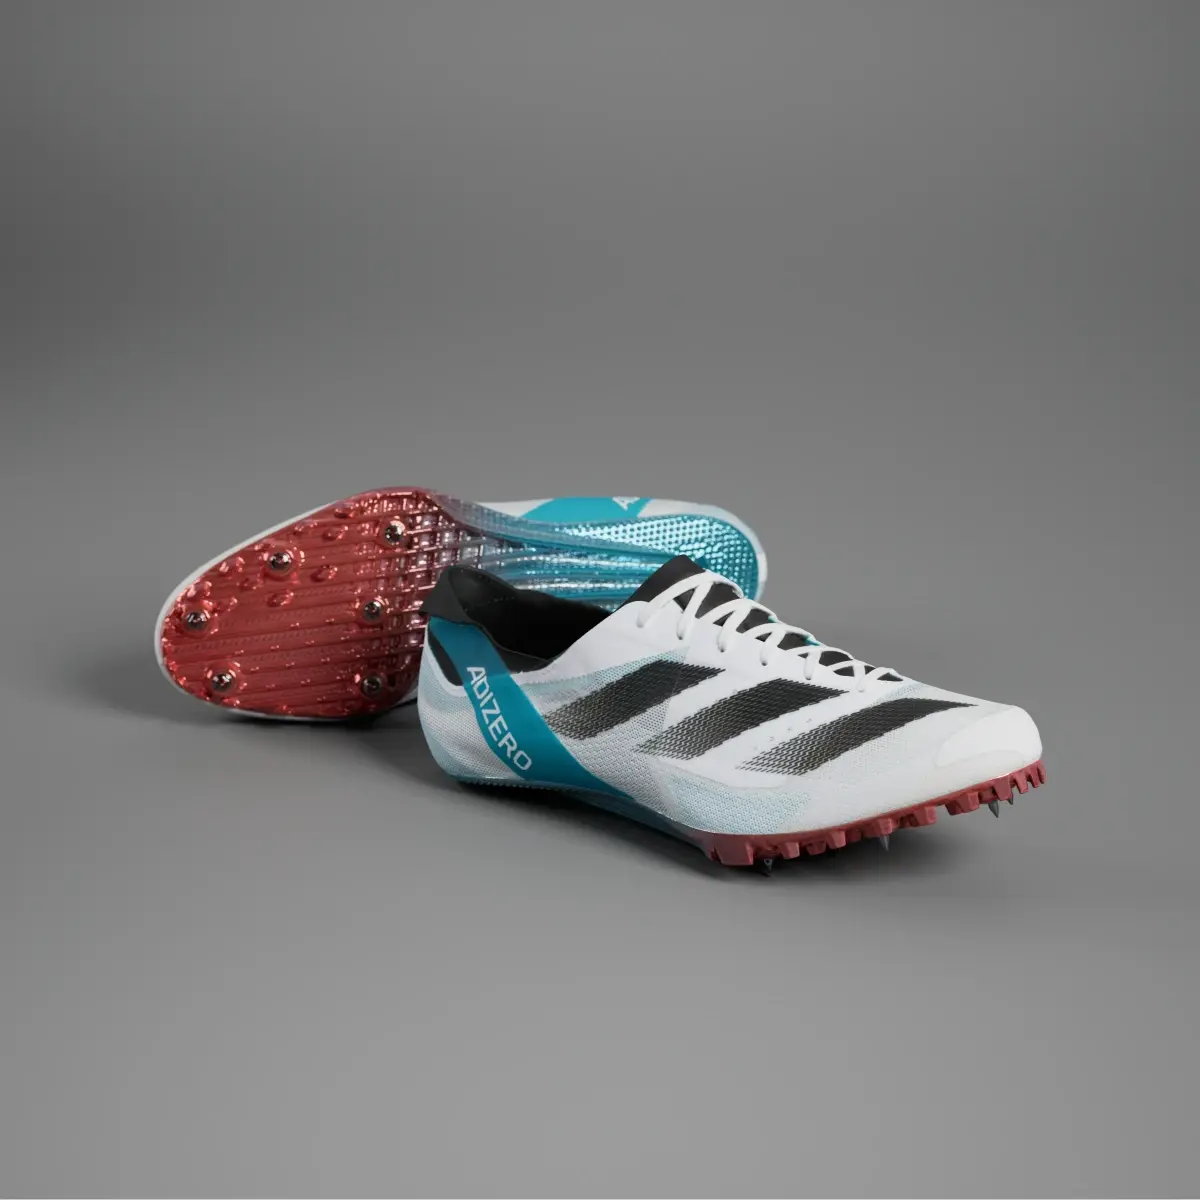 Adidas Adizero Finesse Track and Field Shoes. 1